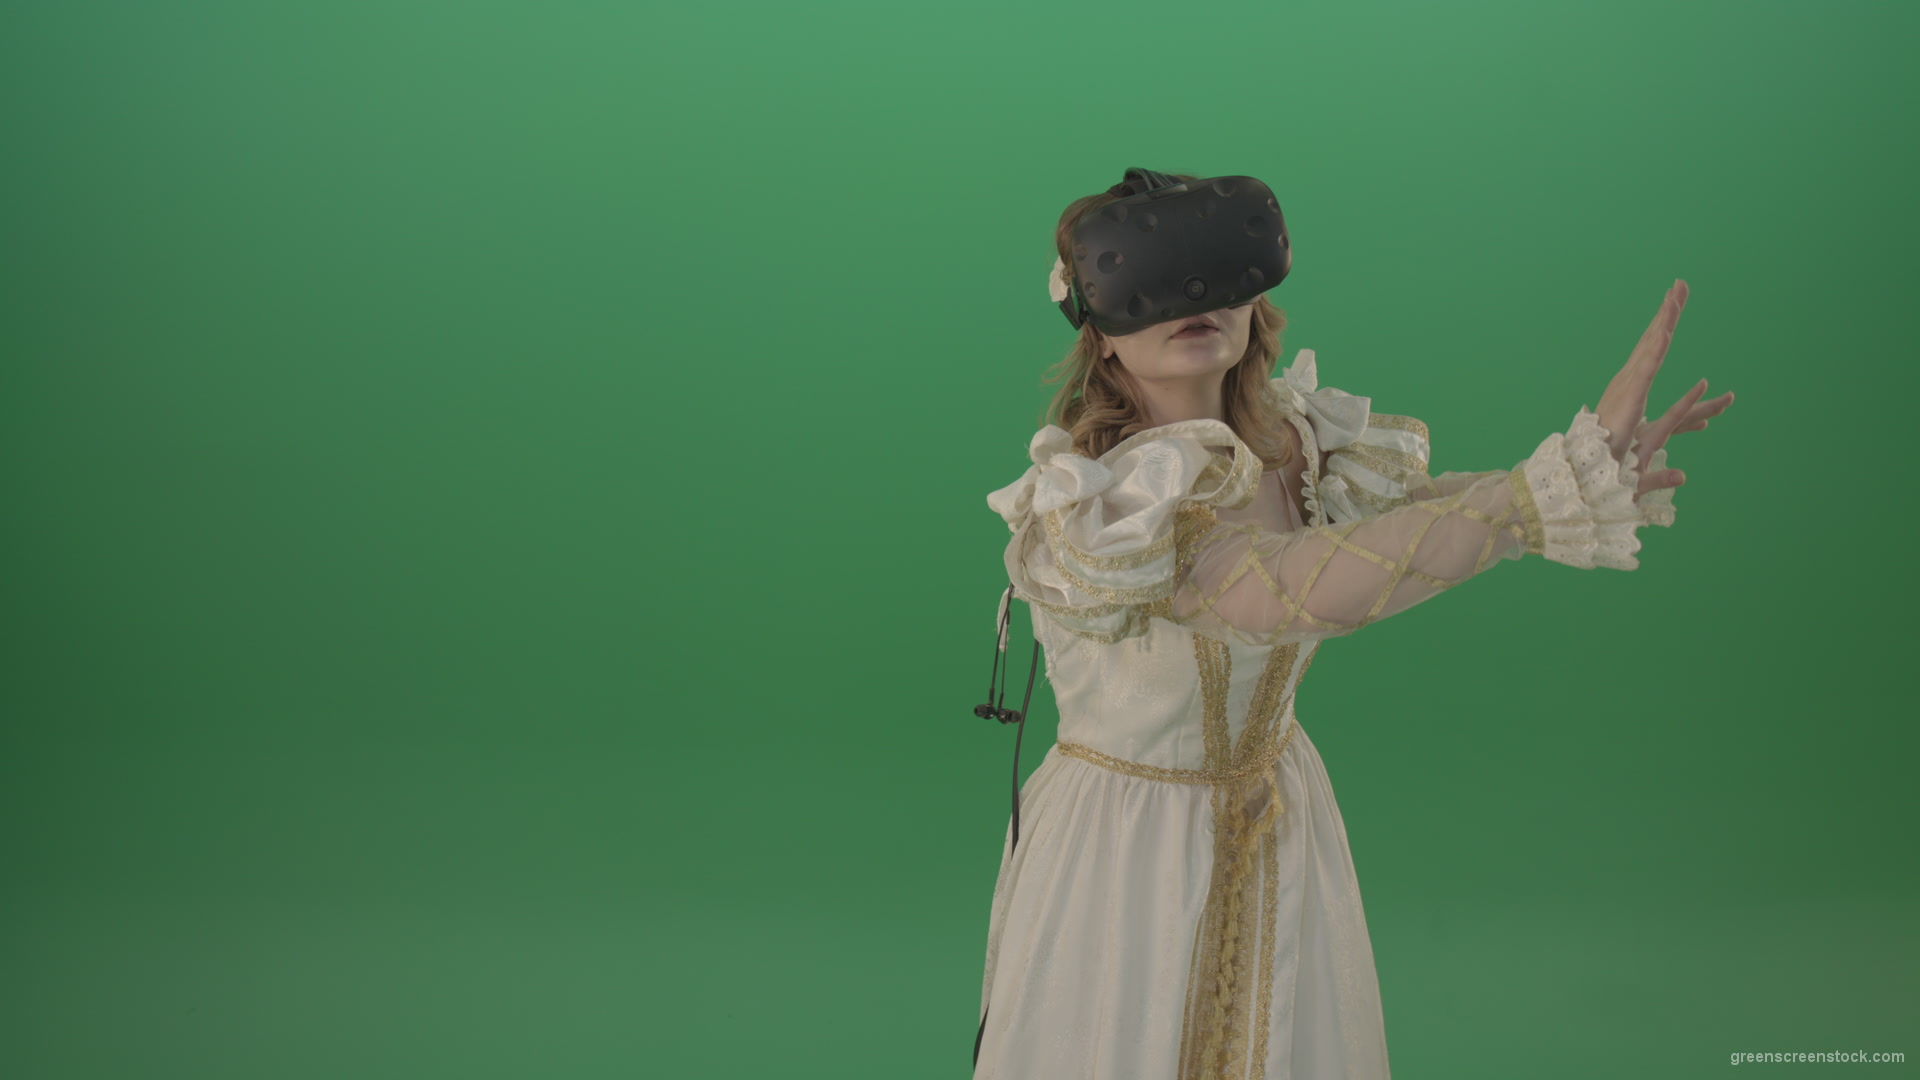 3d-glasses-of-virtual-reality-the-girl-looked-into-the-virtual-world-isolated-on-green-screen_009 Green Screen Stock